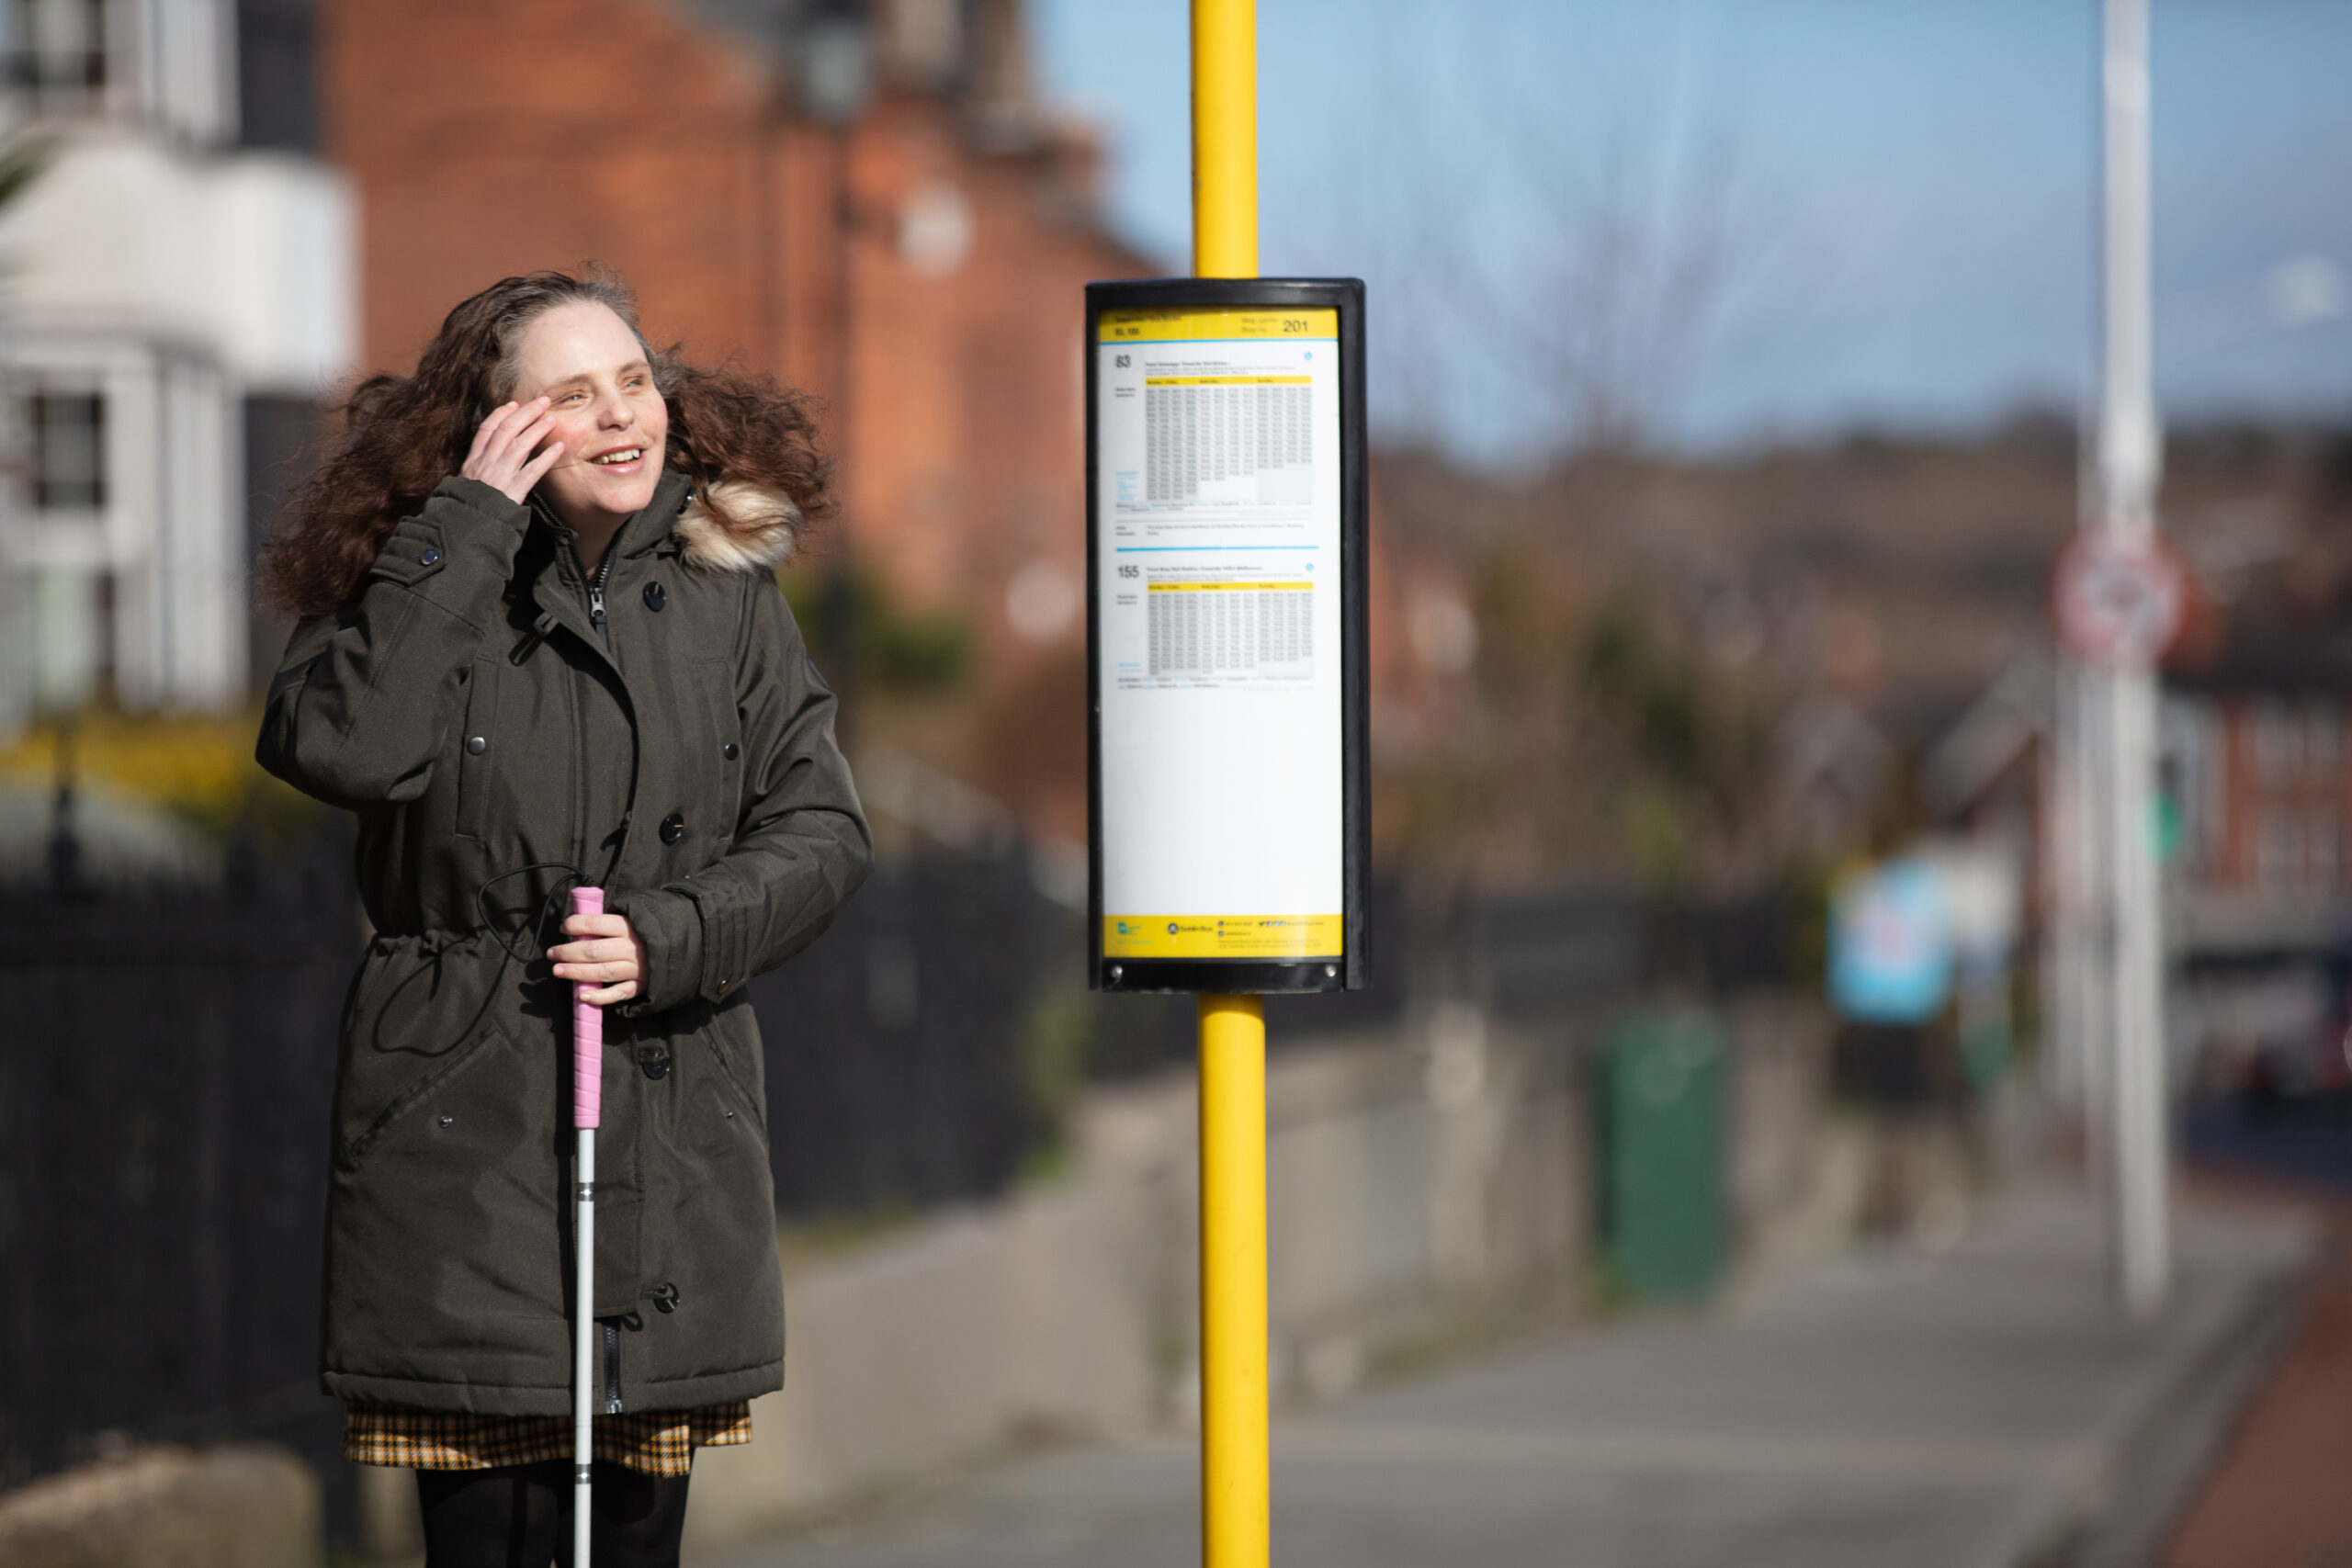 An NCBI service user standing at a bus stop waiting for a bus to come